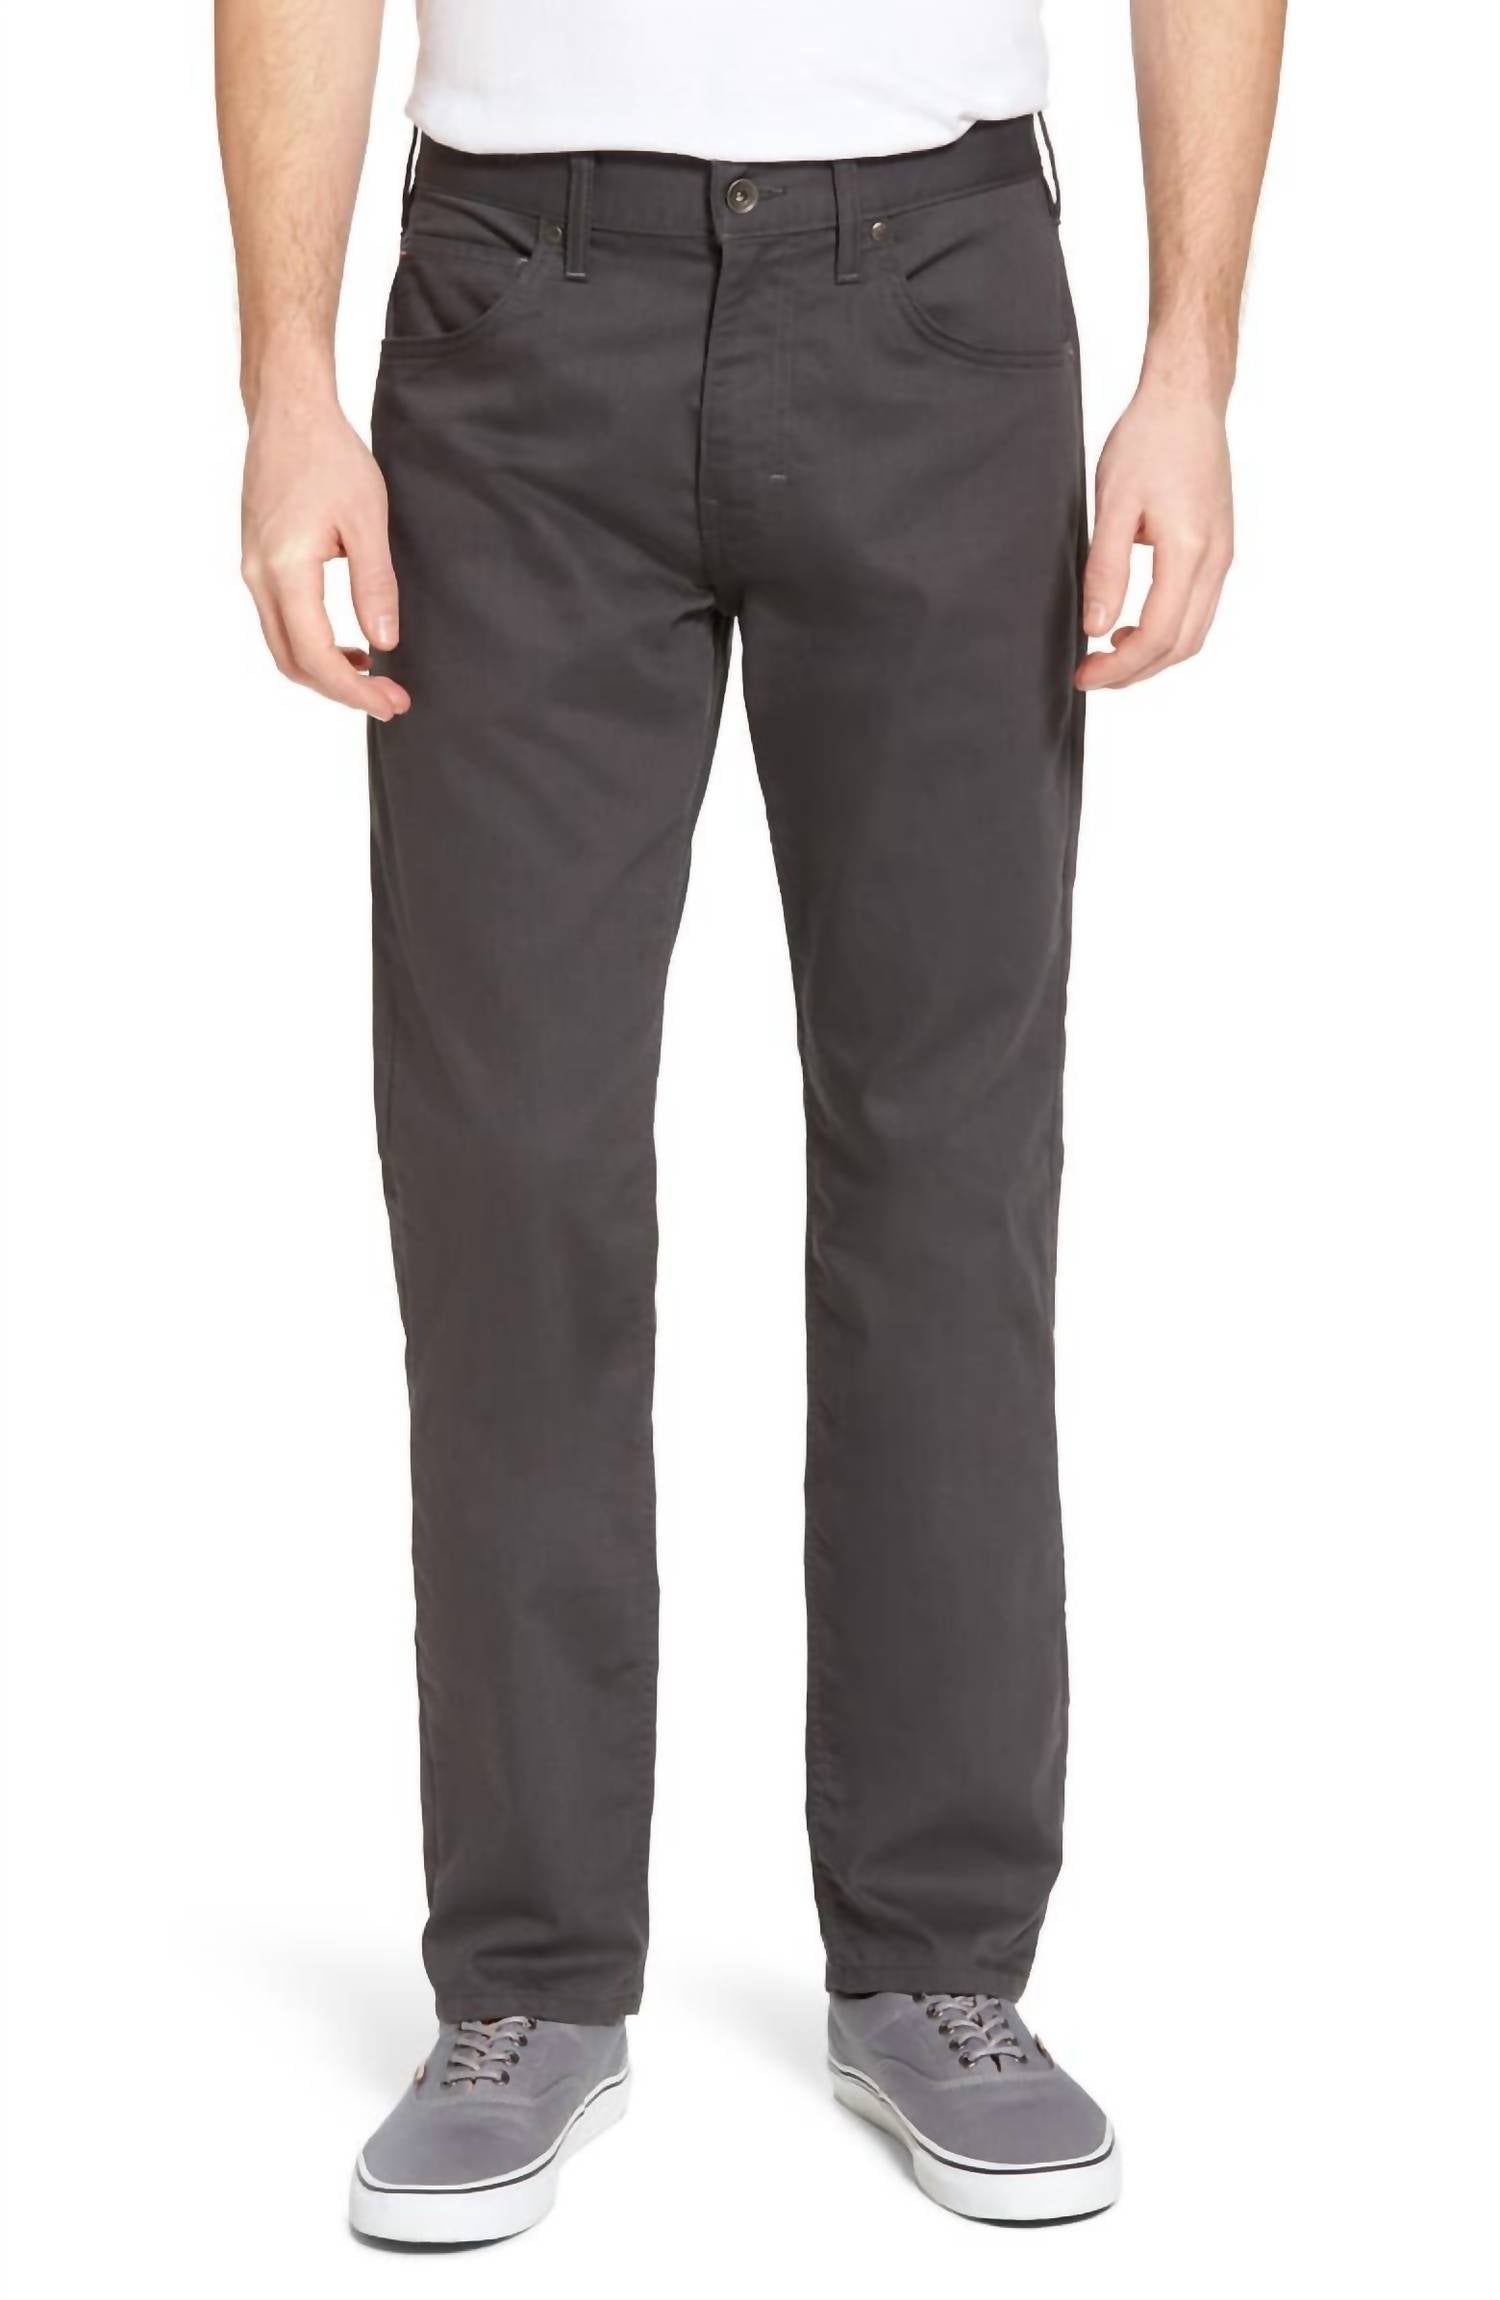 PATAGONIA Men's Performance Twill Jeans In Forge Grey